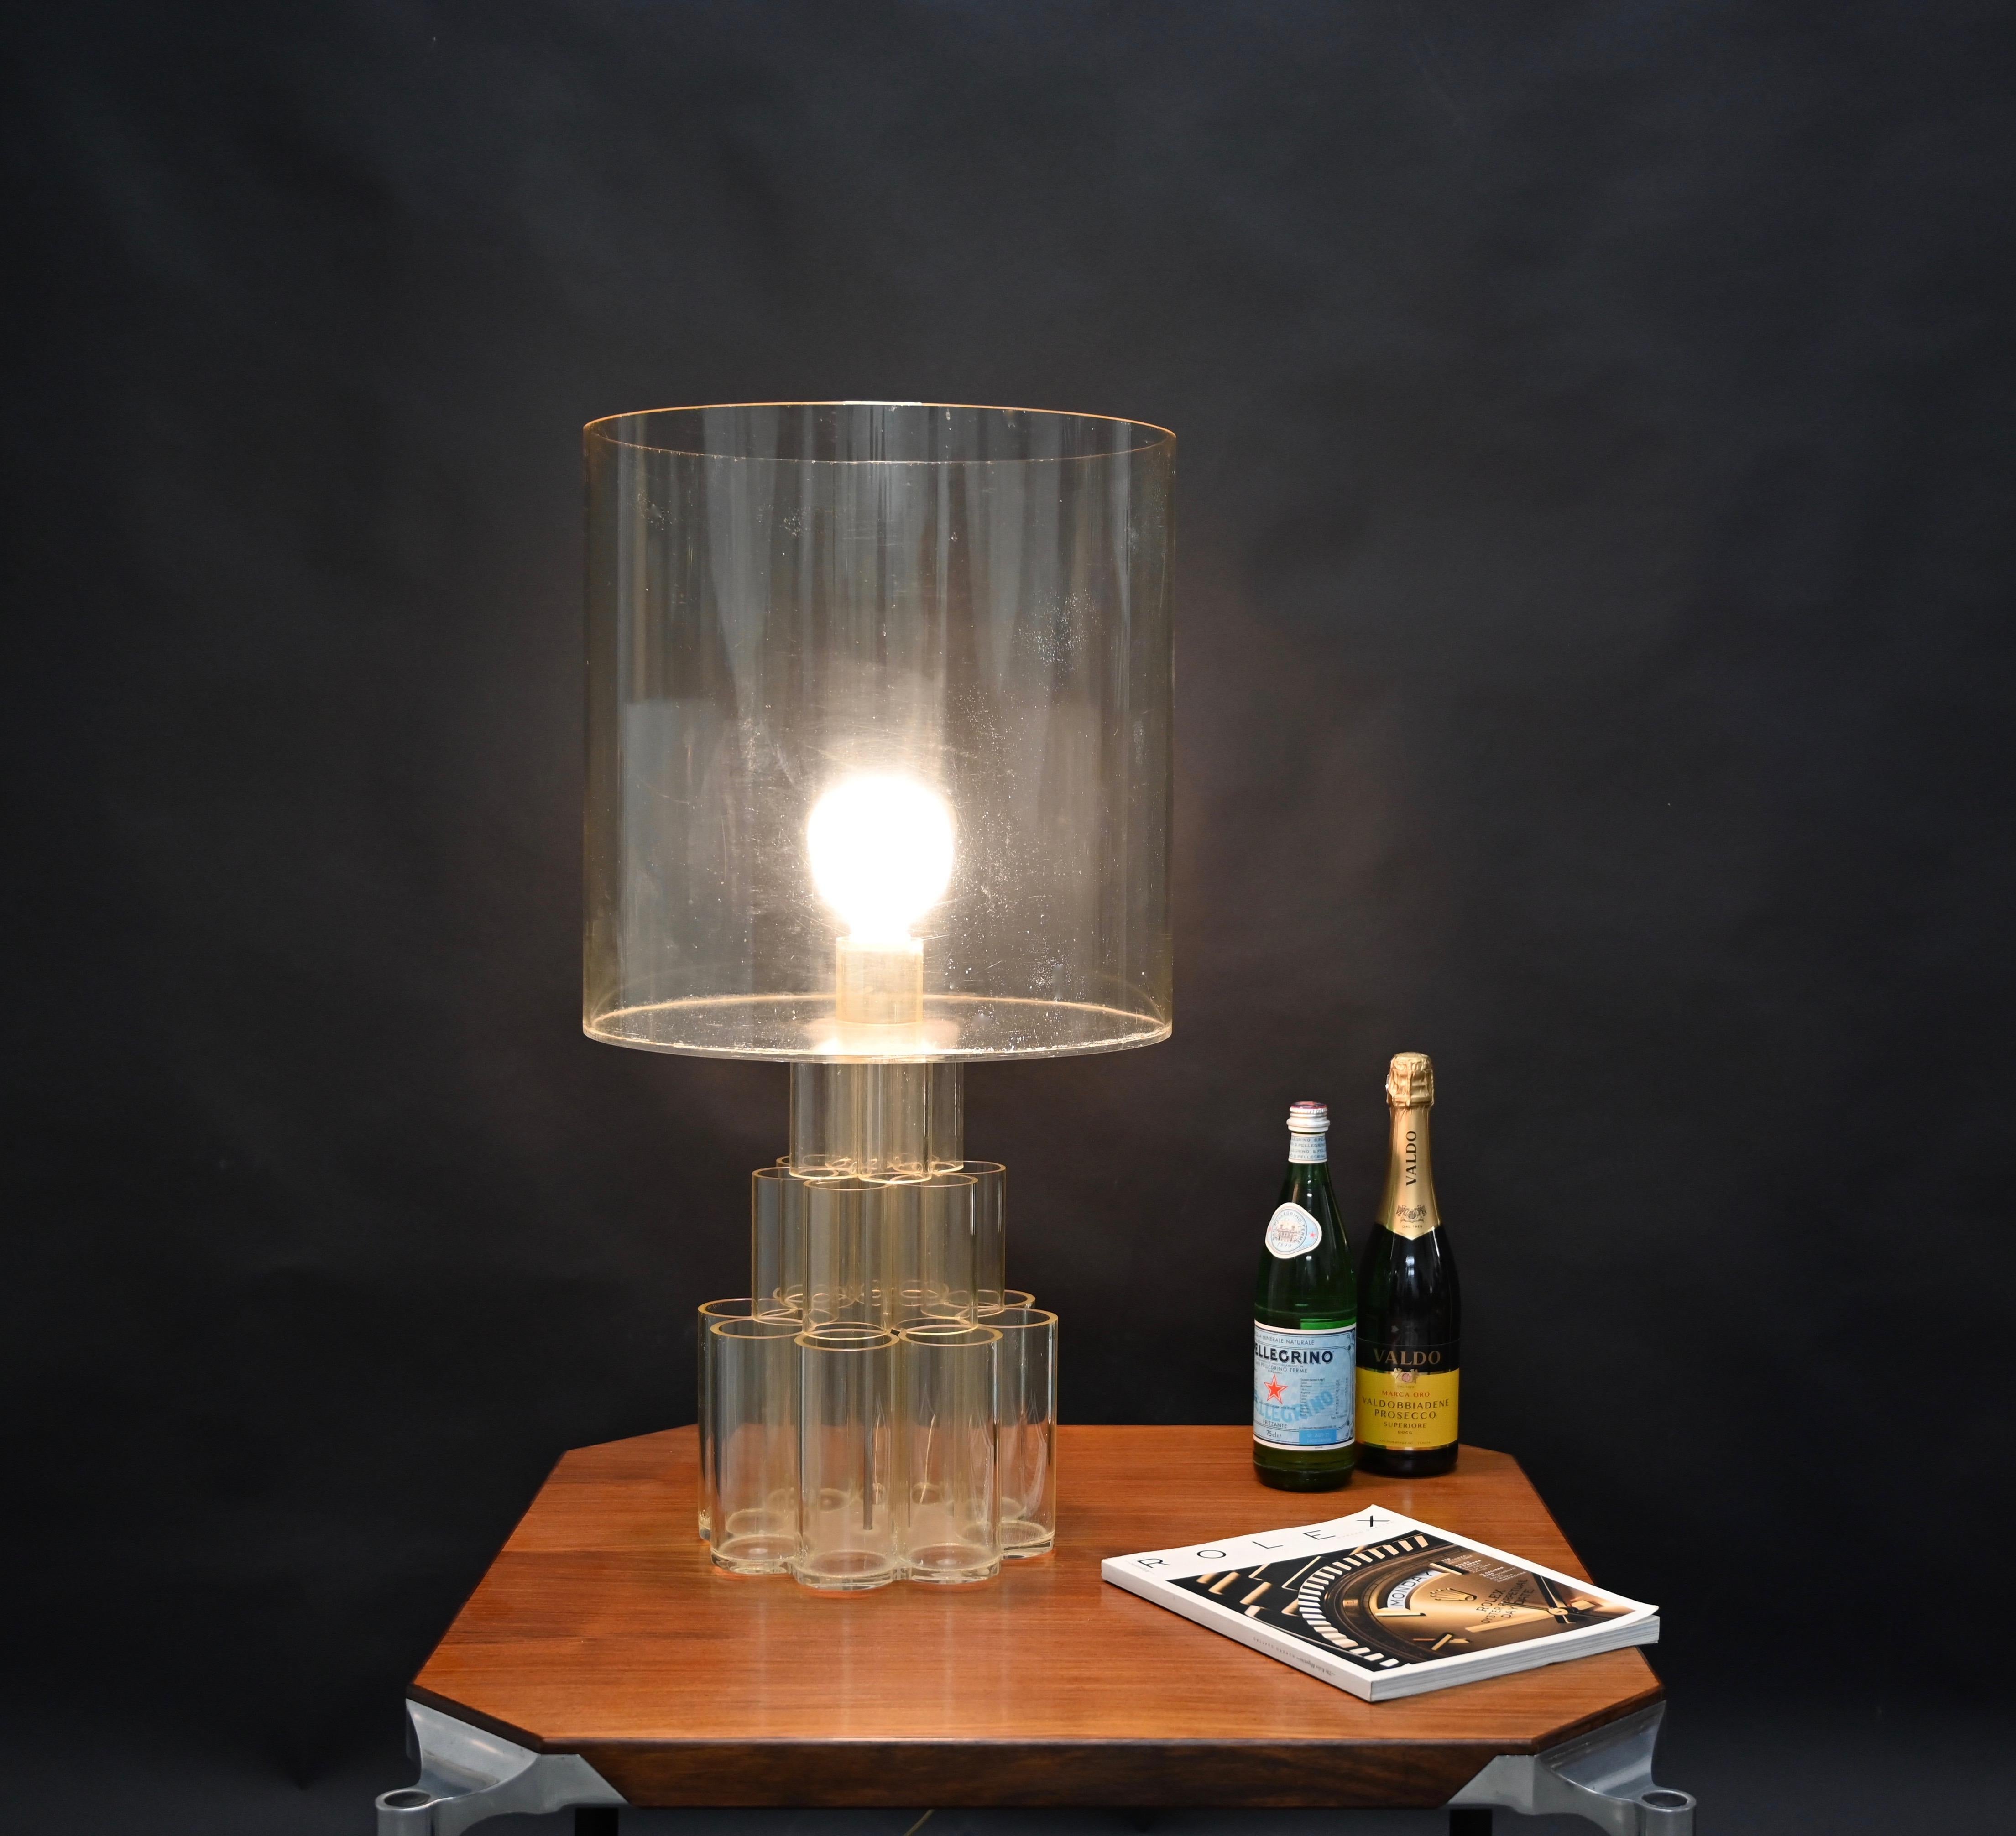 Mid-Century Modern Table Lamp in Lucite Plexiglass, Panton Style, Italy, 1970s For Sale 1